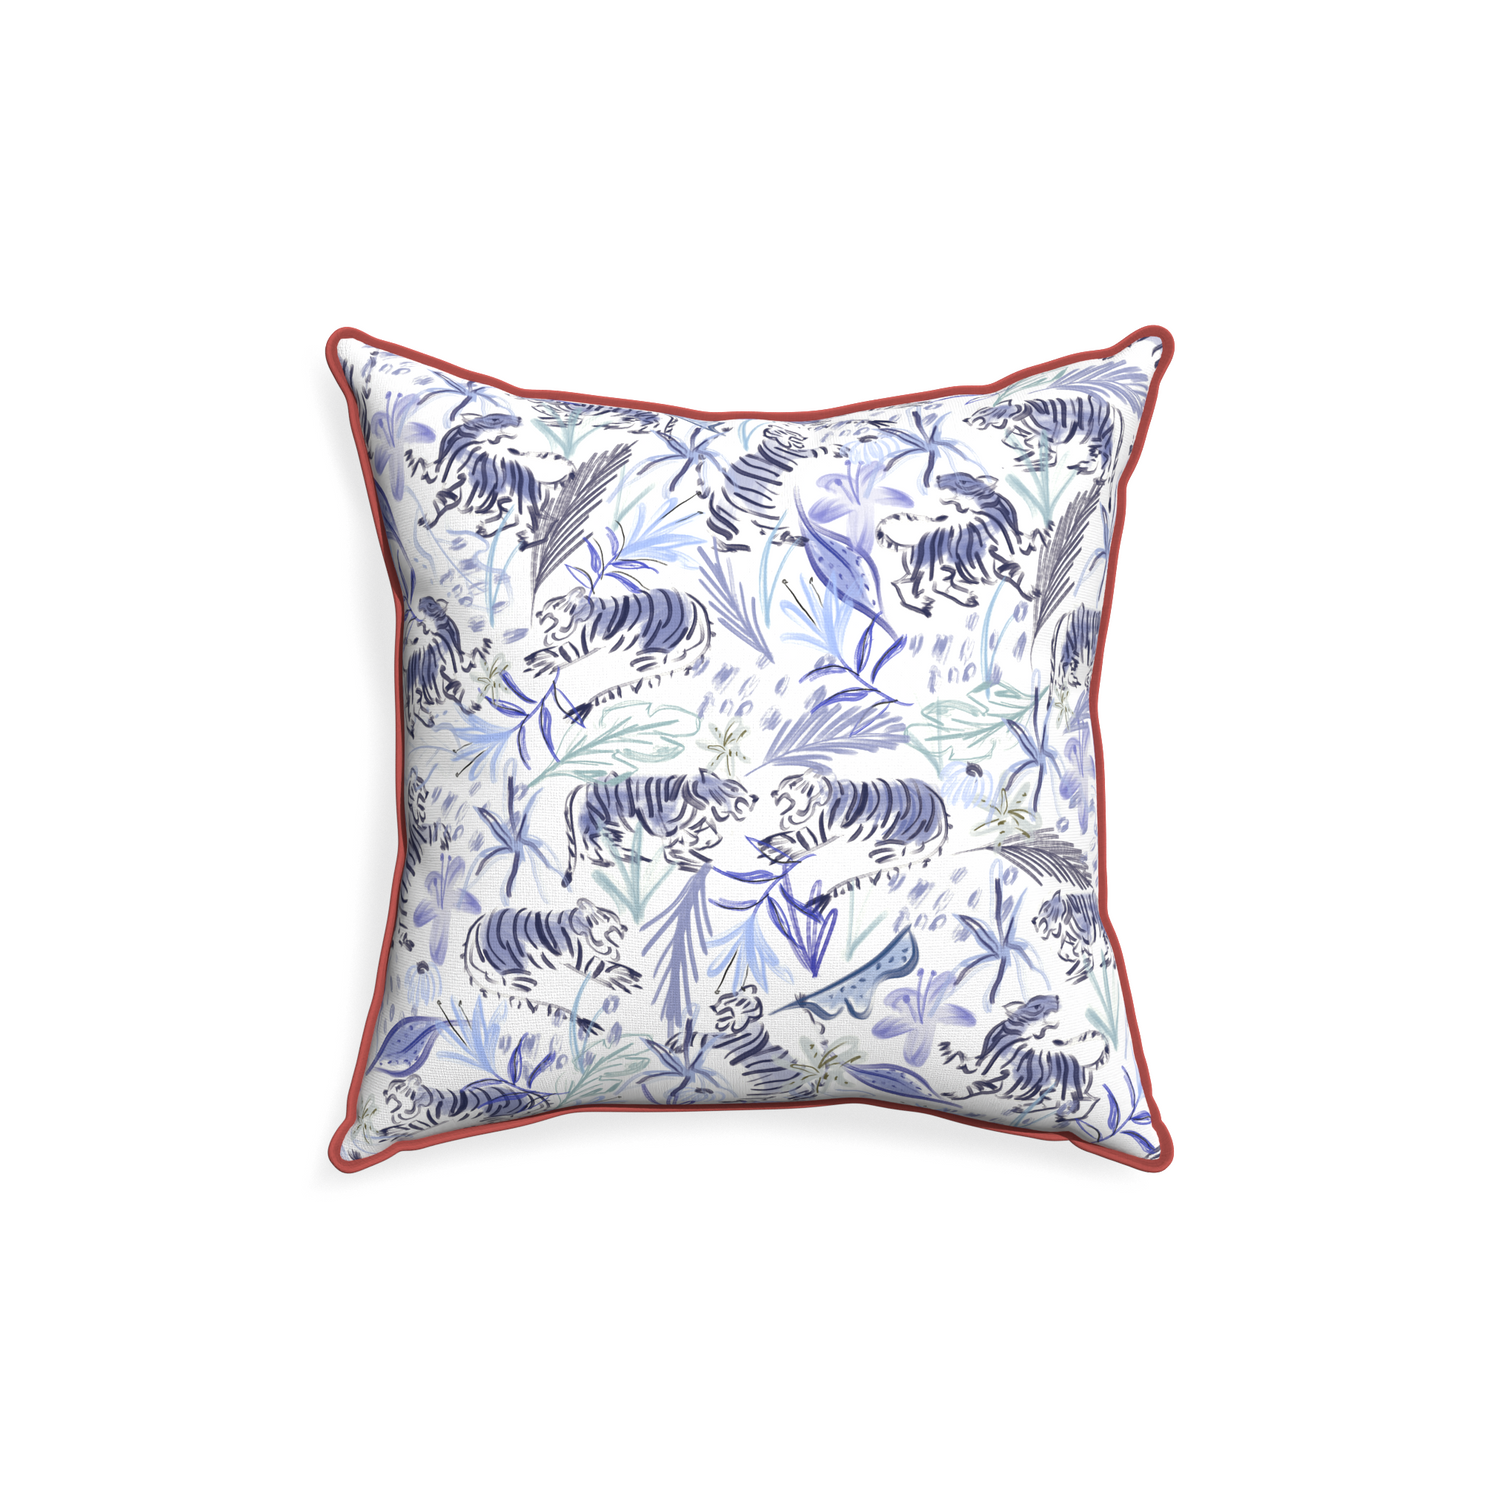 18-square frida blue custom blue with intricate tiger designpillow with c piping on white background